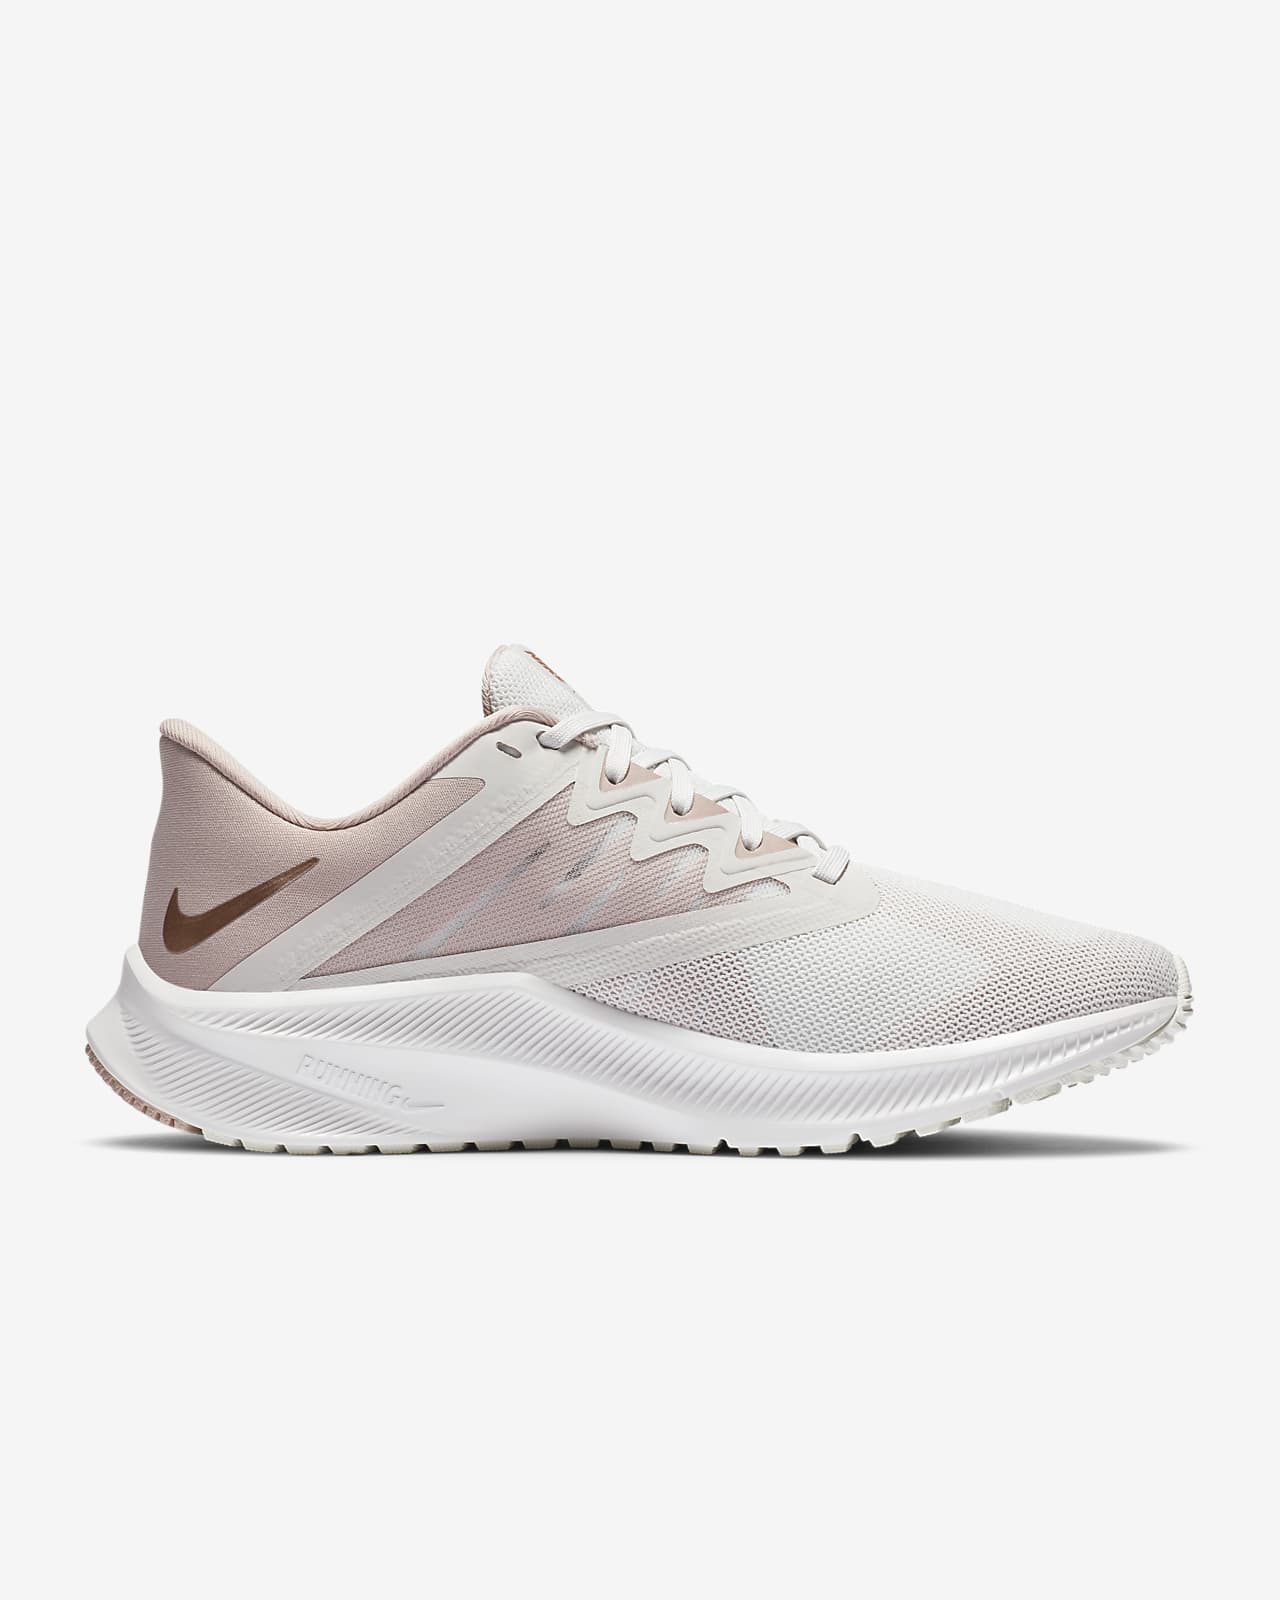 nike quest 3 womens running shoes